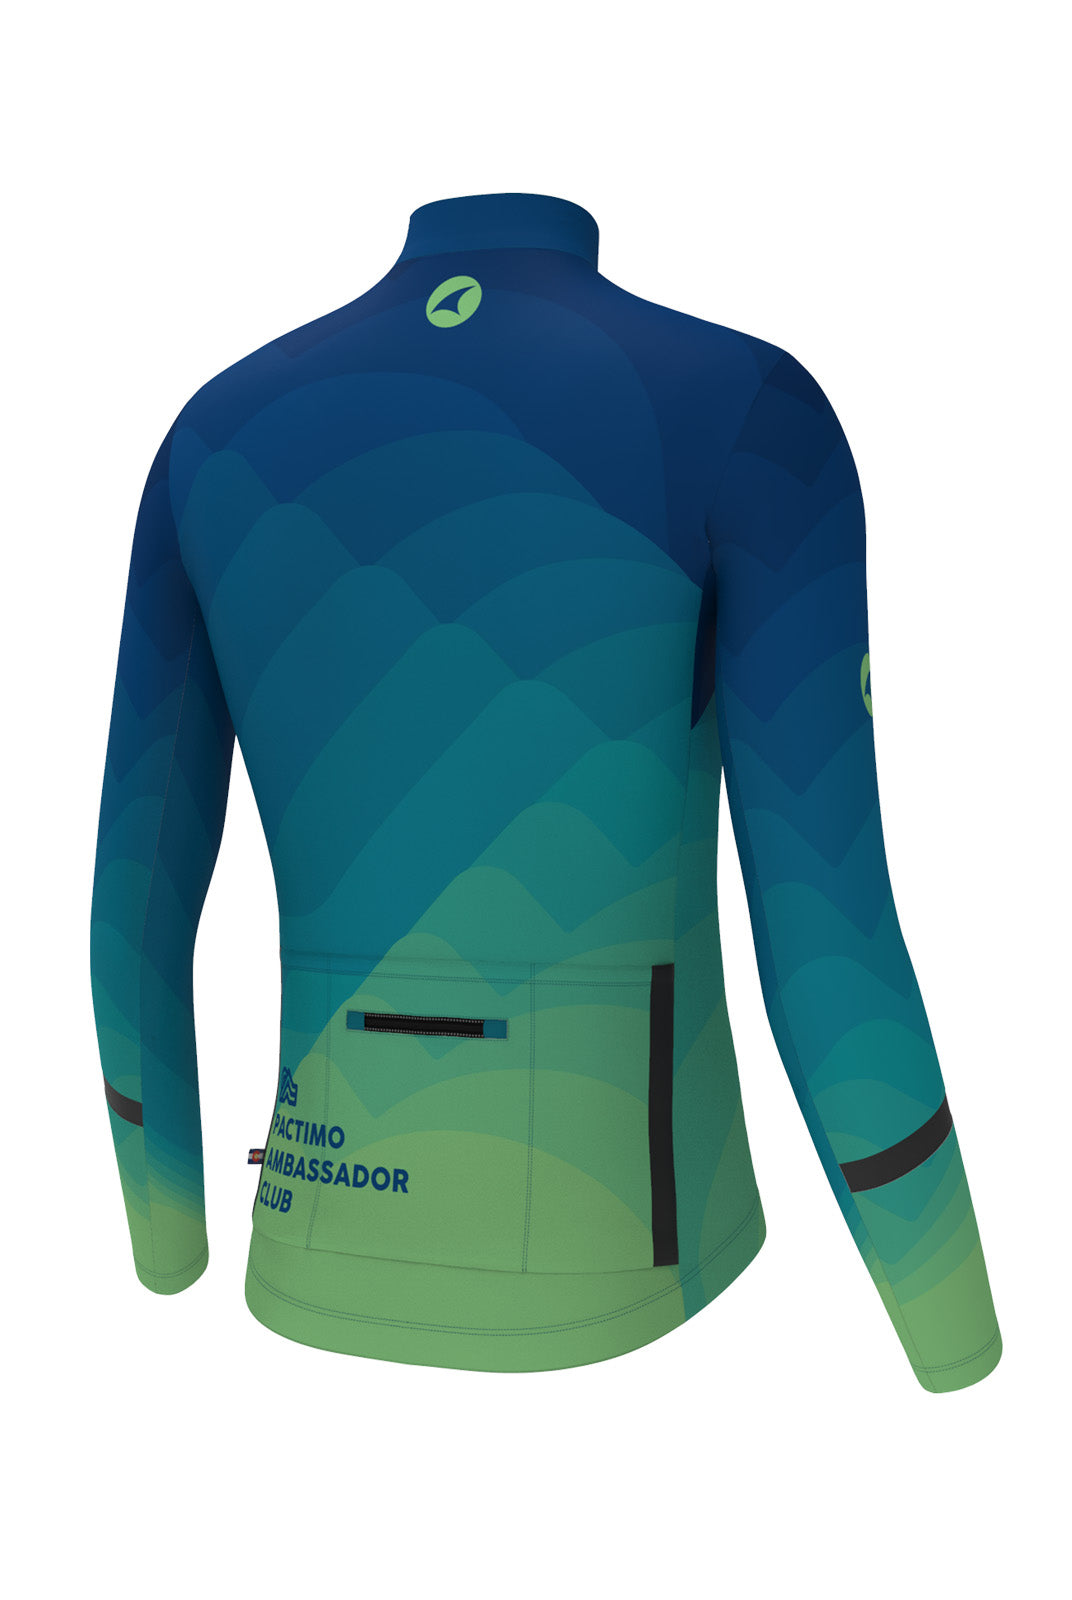 Men's Twighlight PAC Alpine Thermal Cycling Jersey